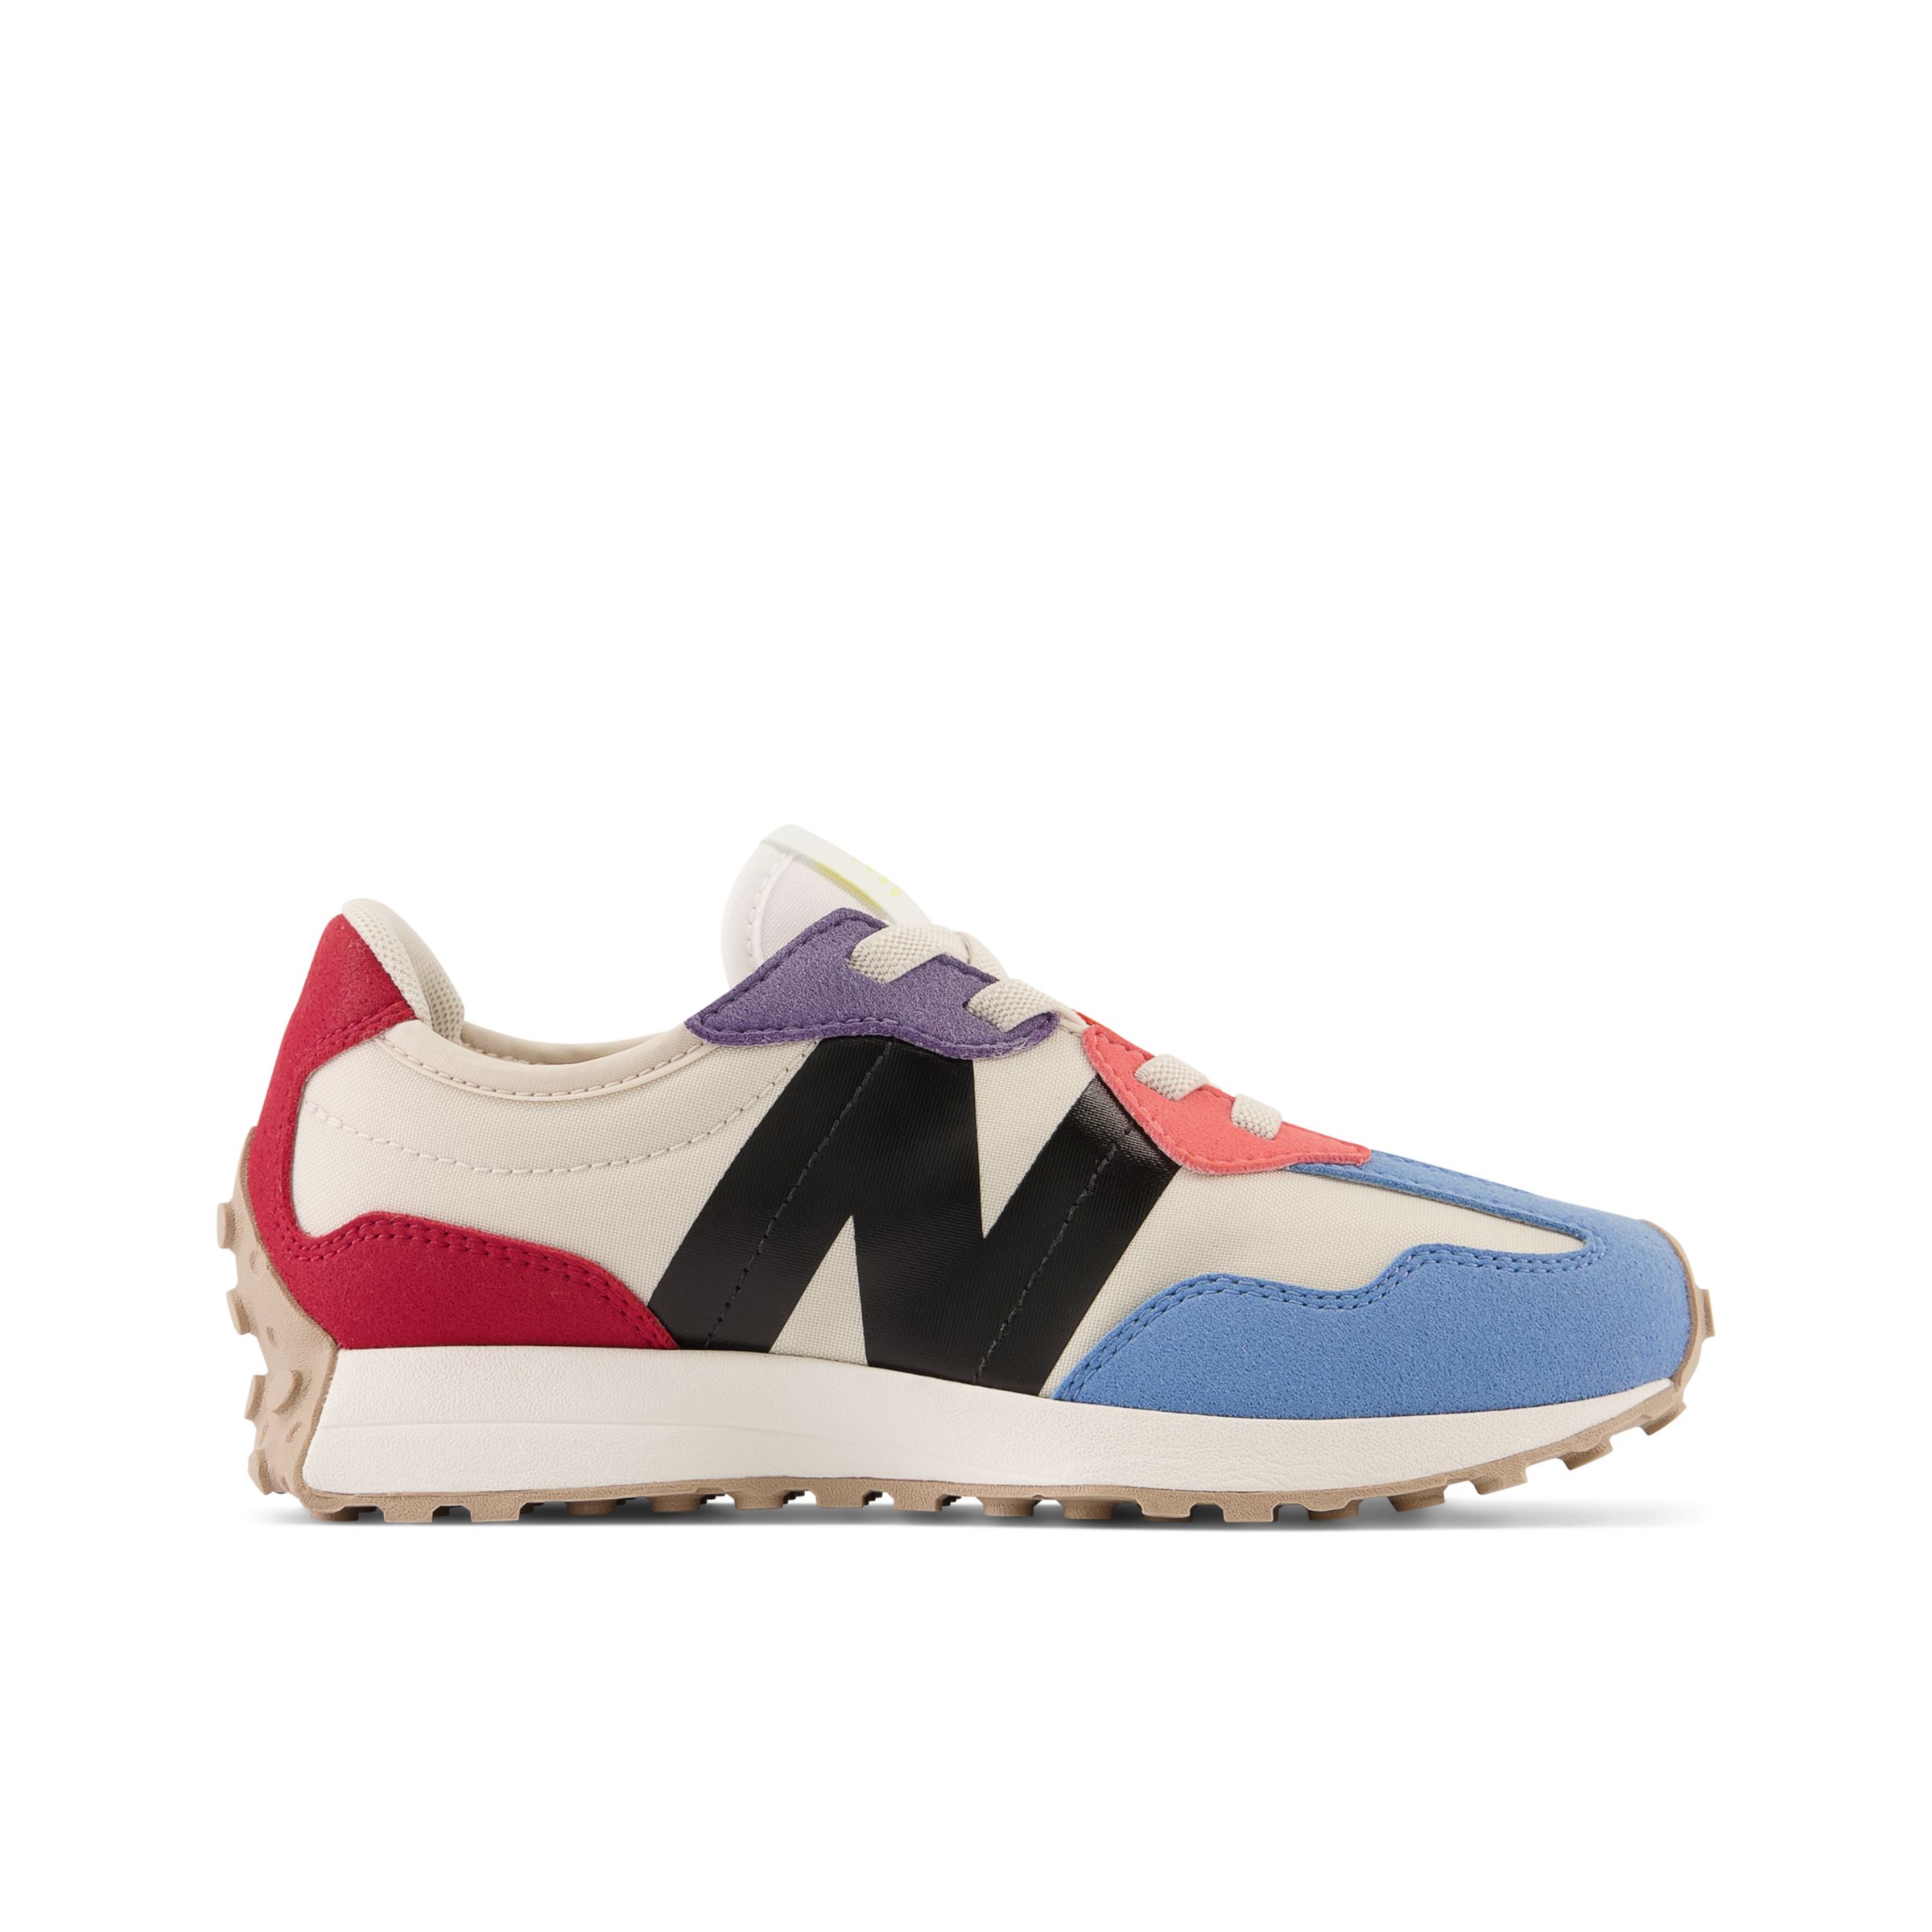 Kids 327 Bungee Lace Lifestyle shoes - New Balance